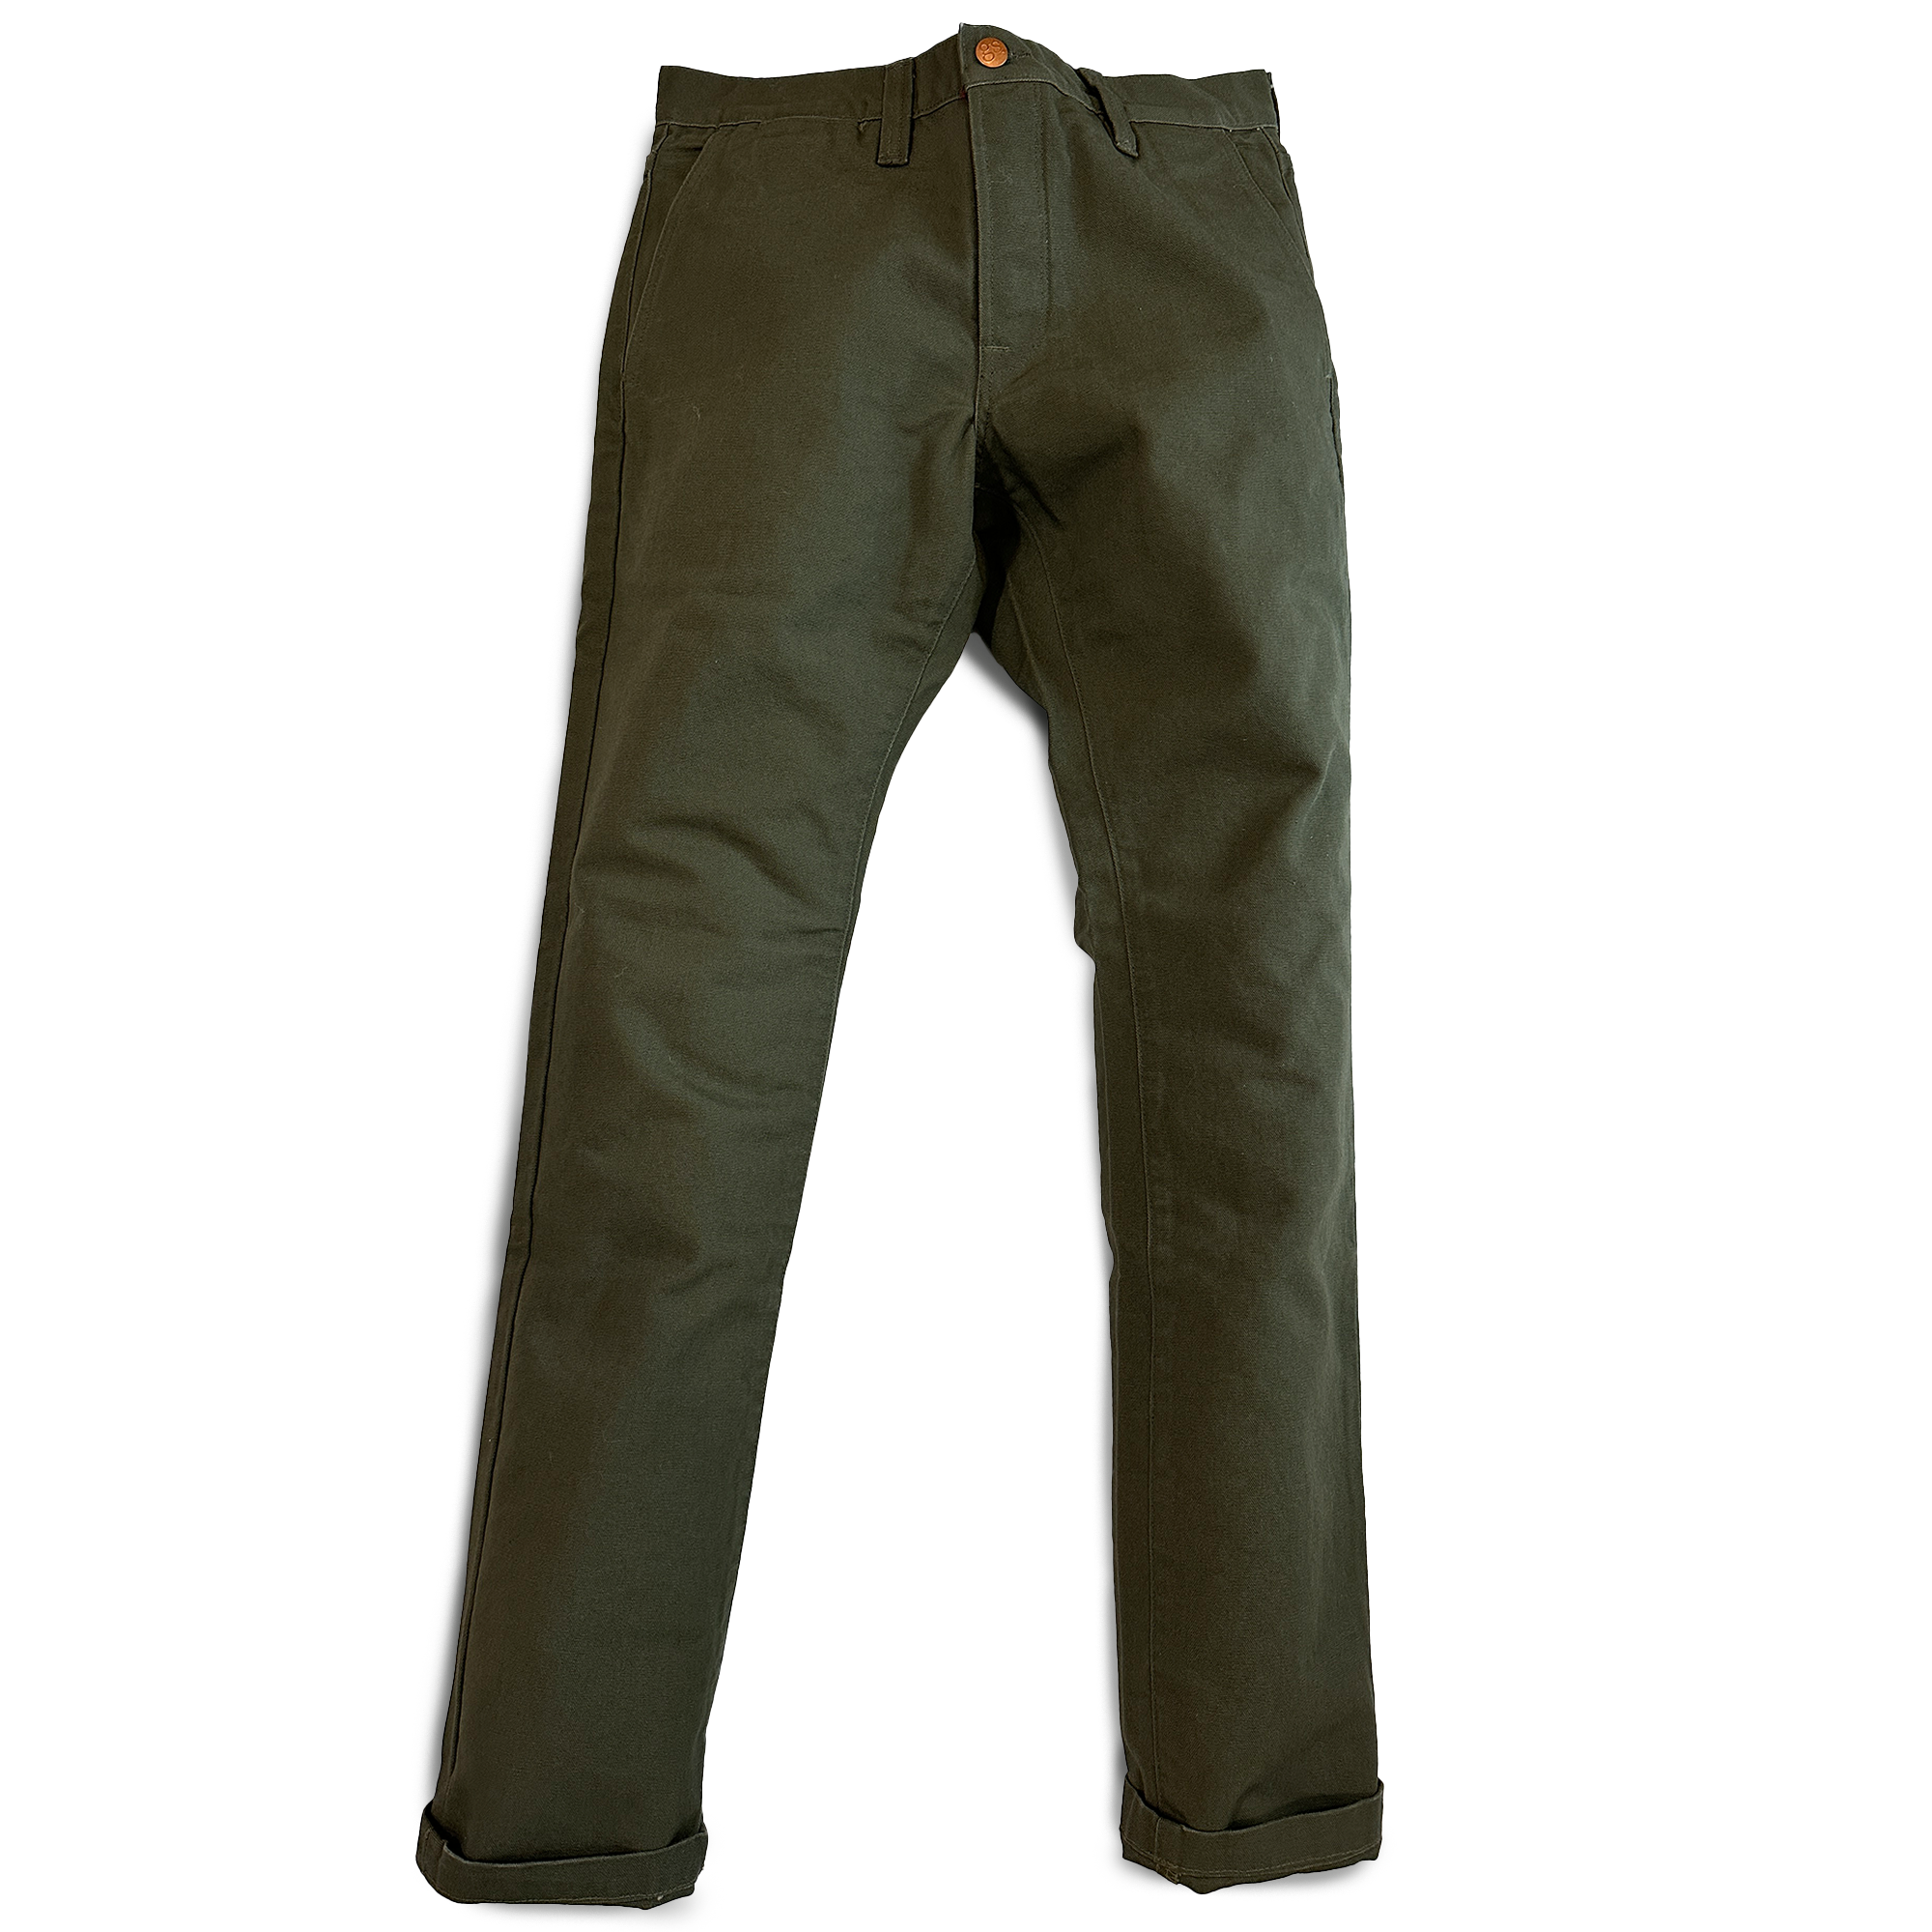 Foundation Canvas Pant - 12 oz. - Olive - grown&sewn